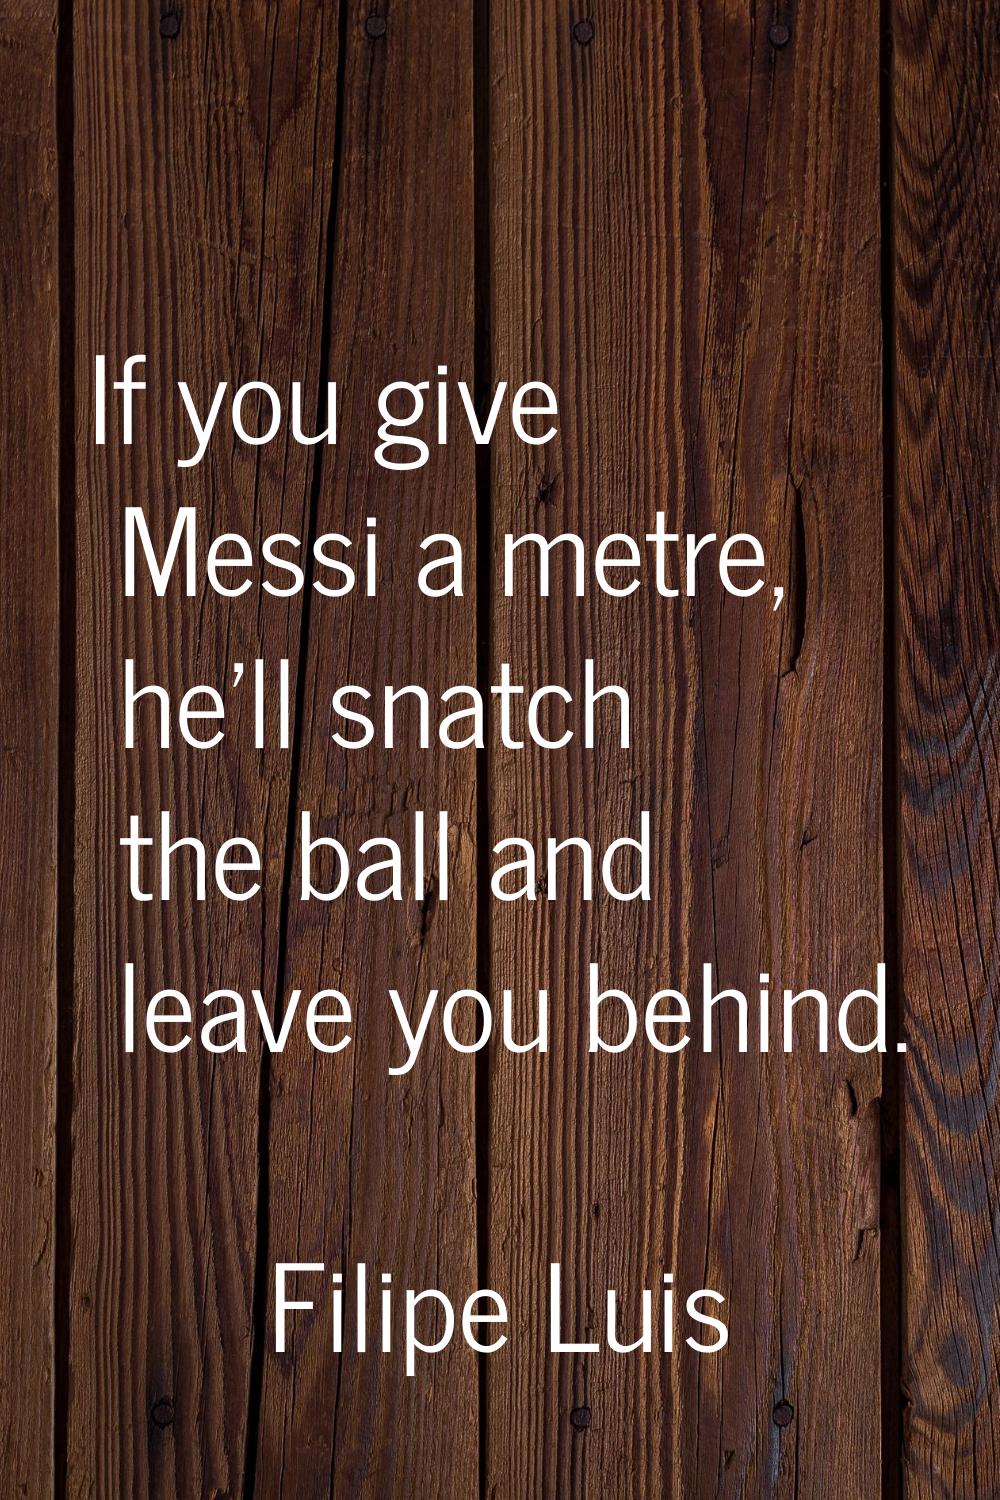 If you give Messi a metre, he'll snatch the ball and leave you behind.